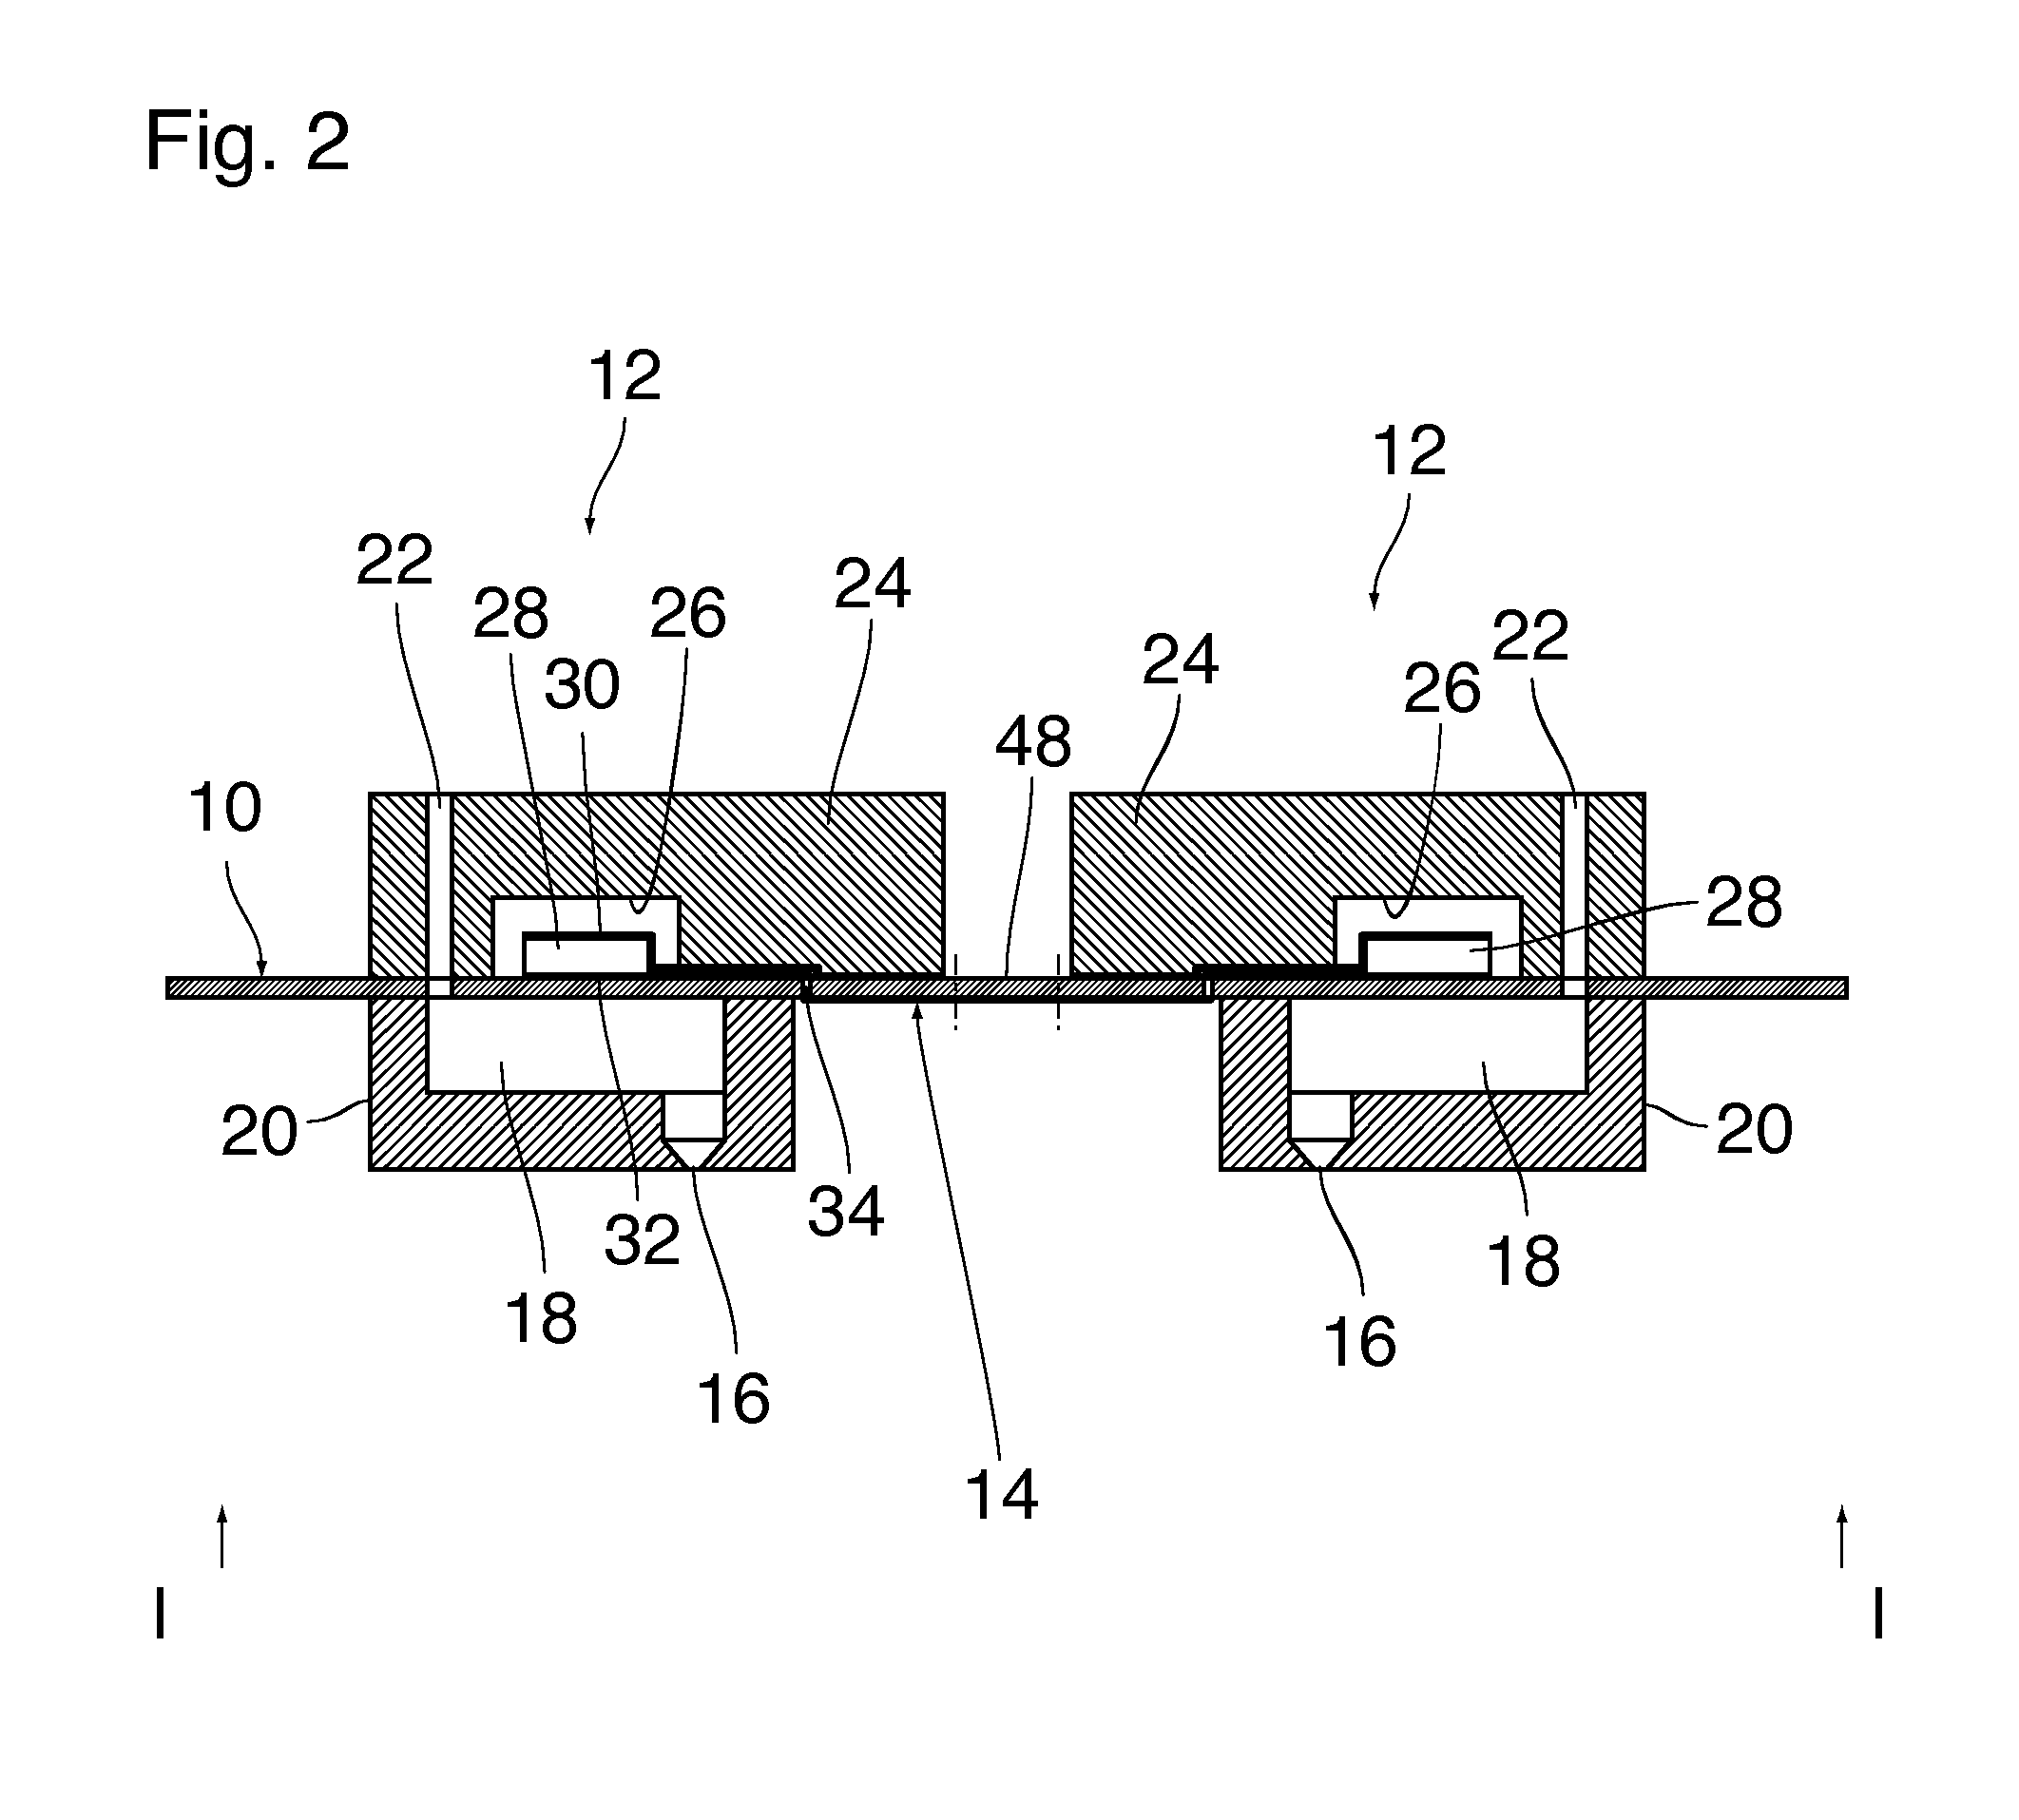 Substrate plate for MEMS devices